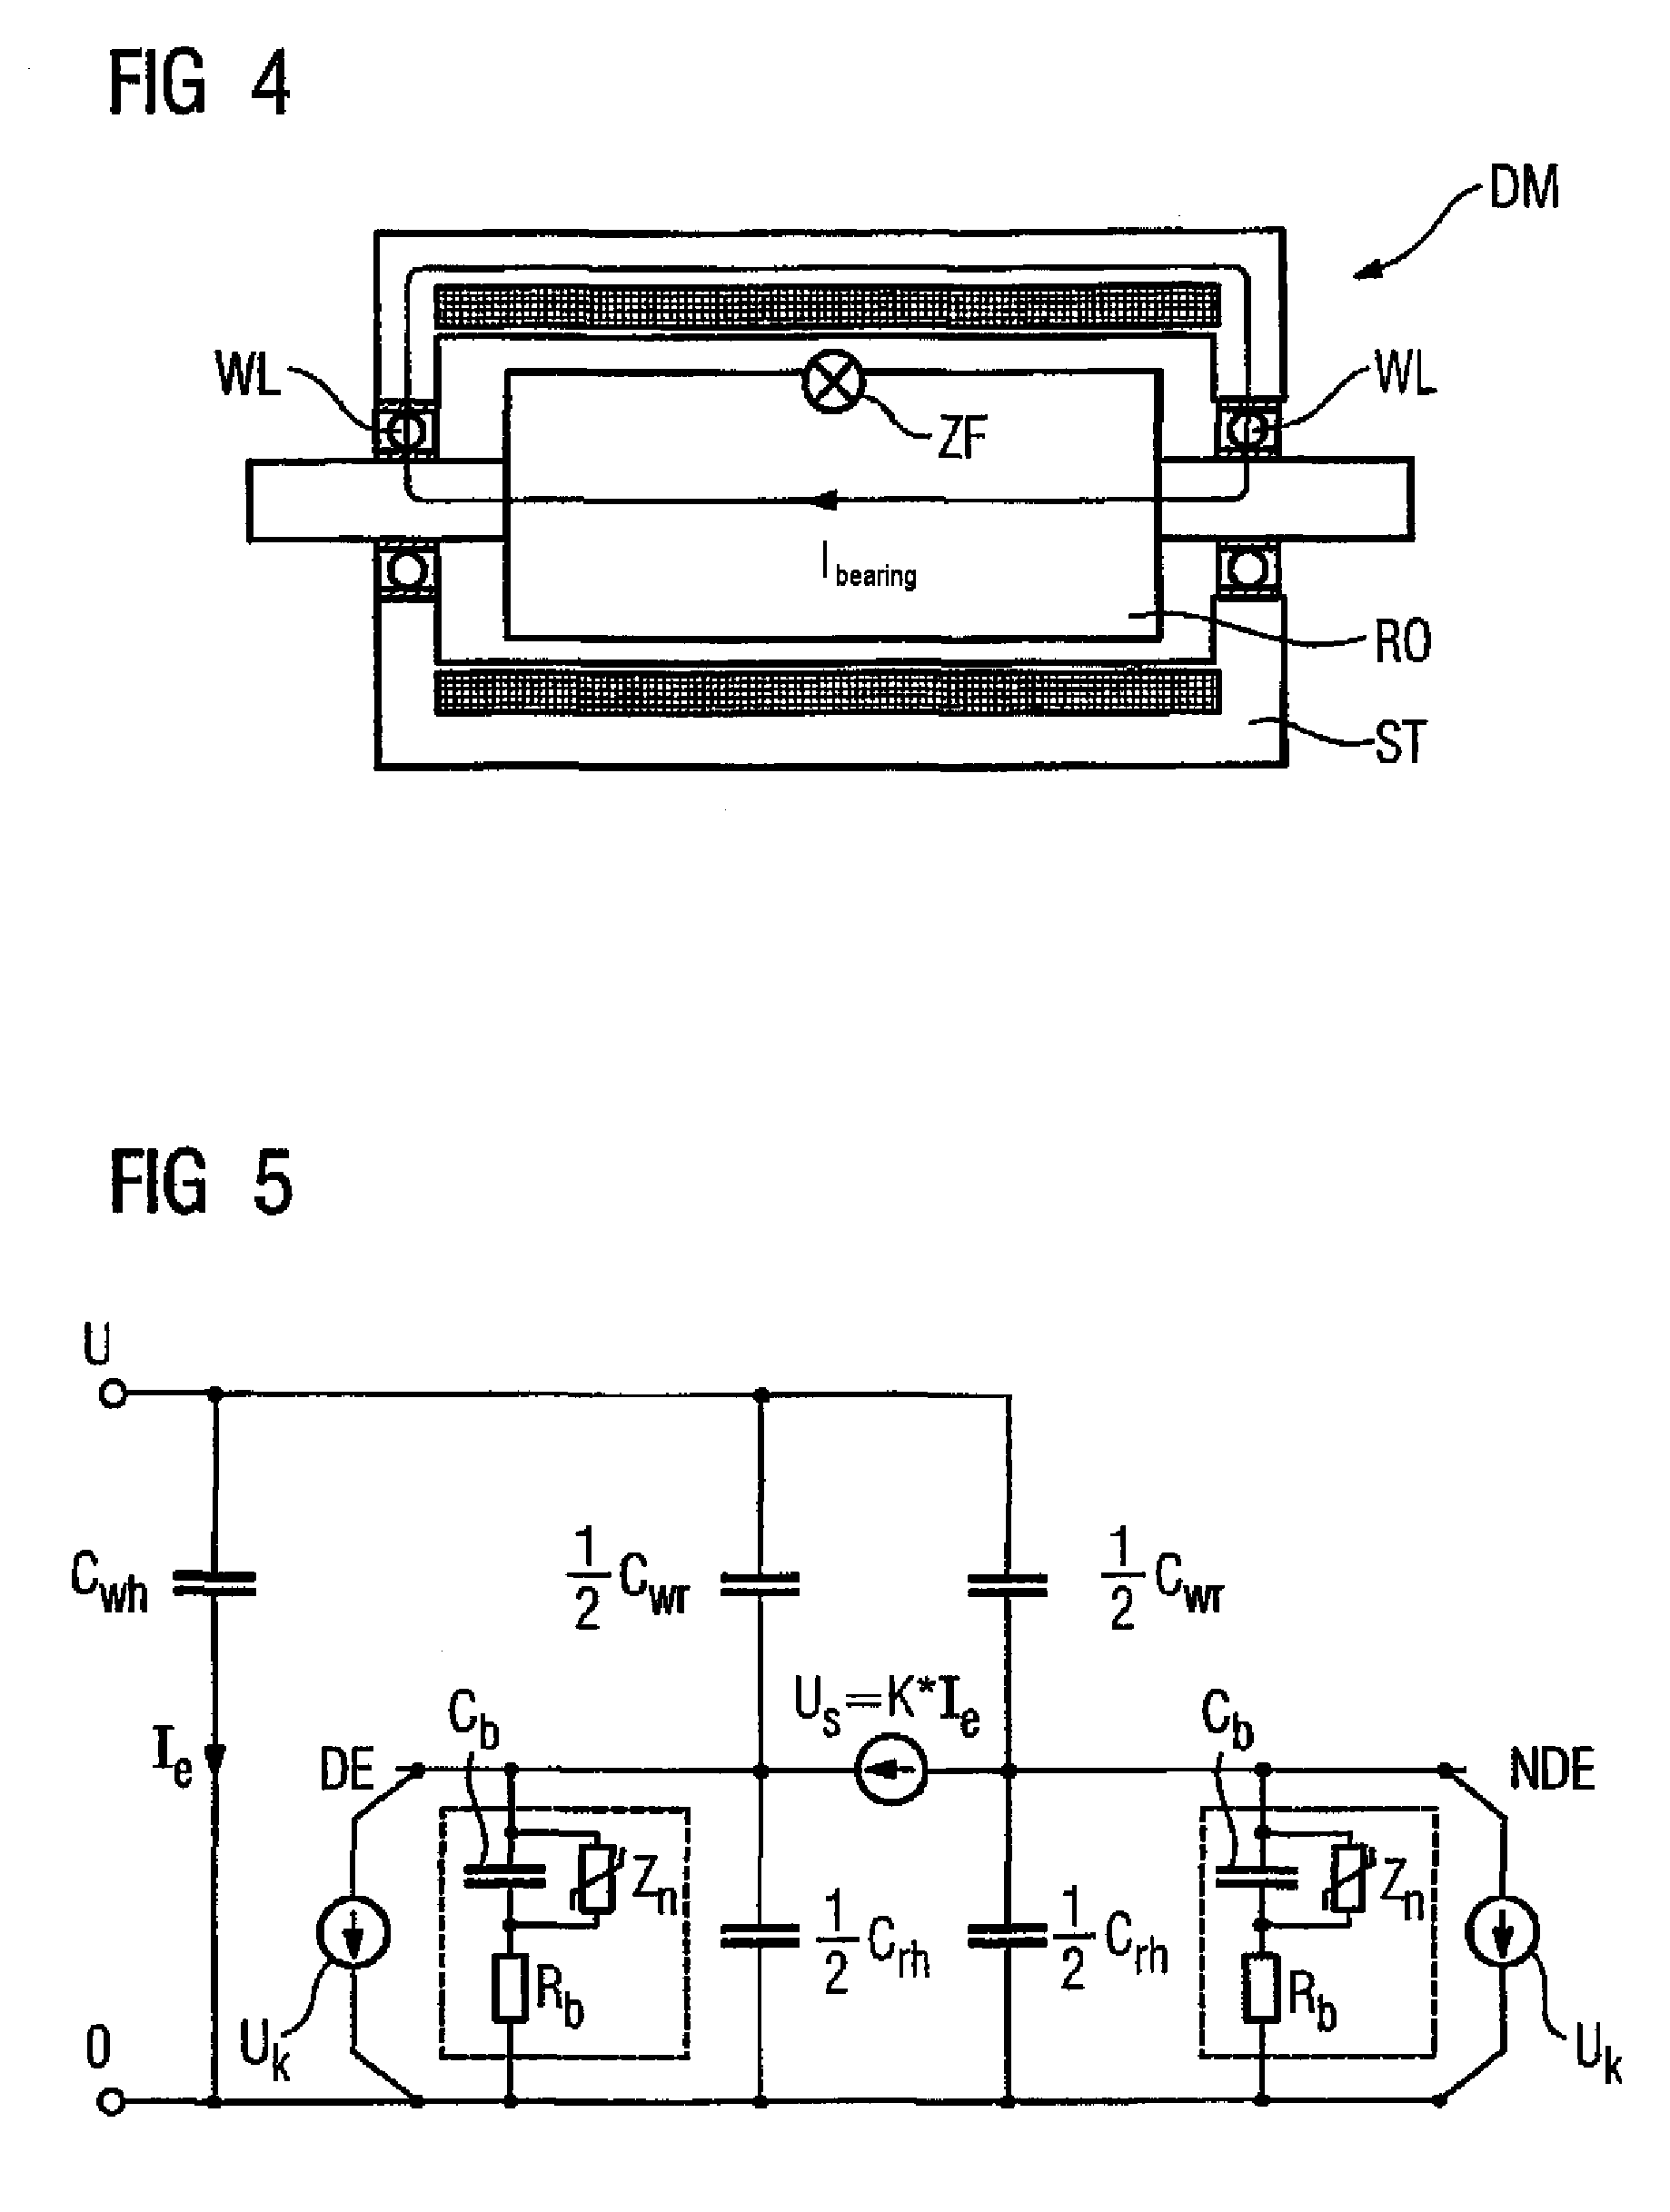 Compensation method and apparatus for preventing damaging bearing currents in an electrical machine